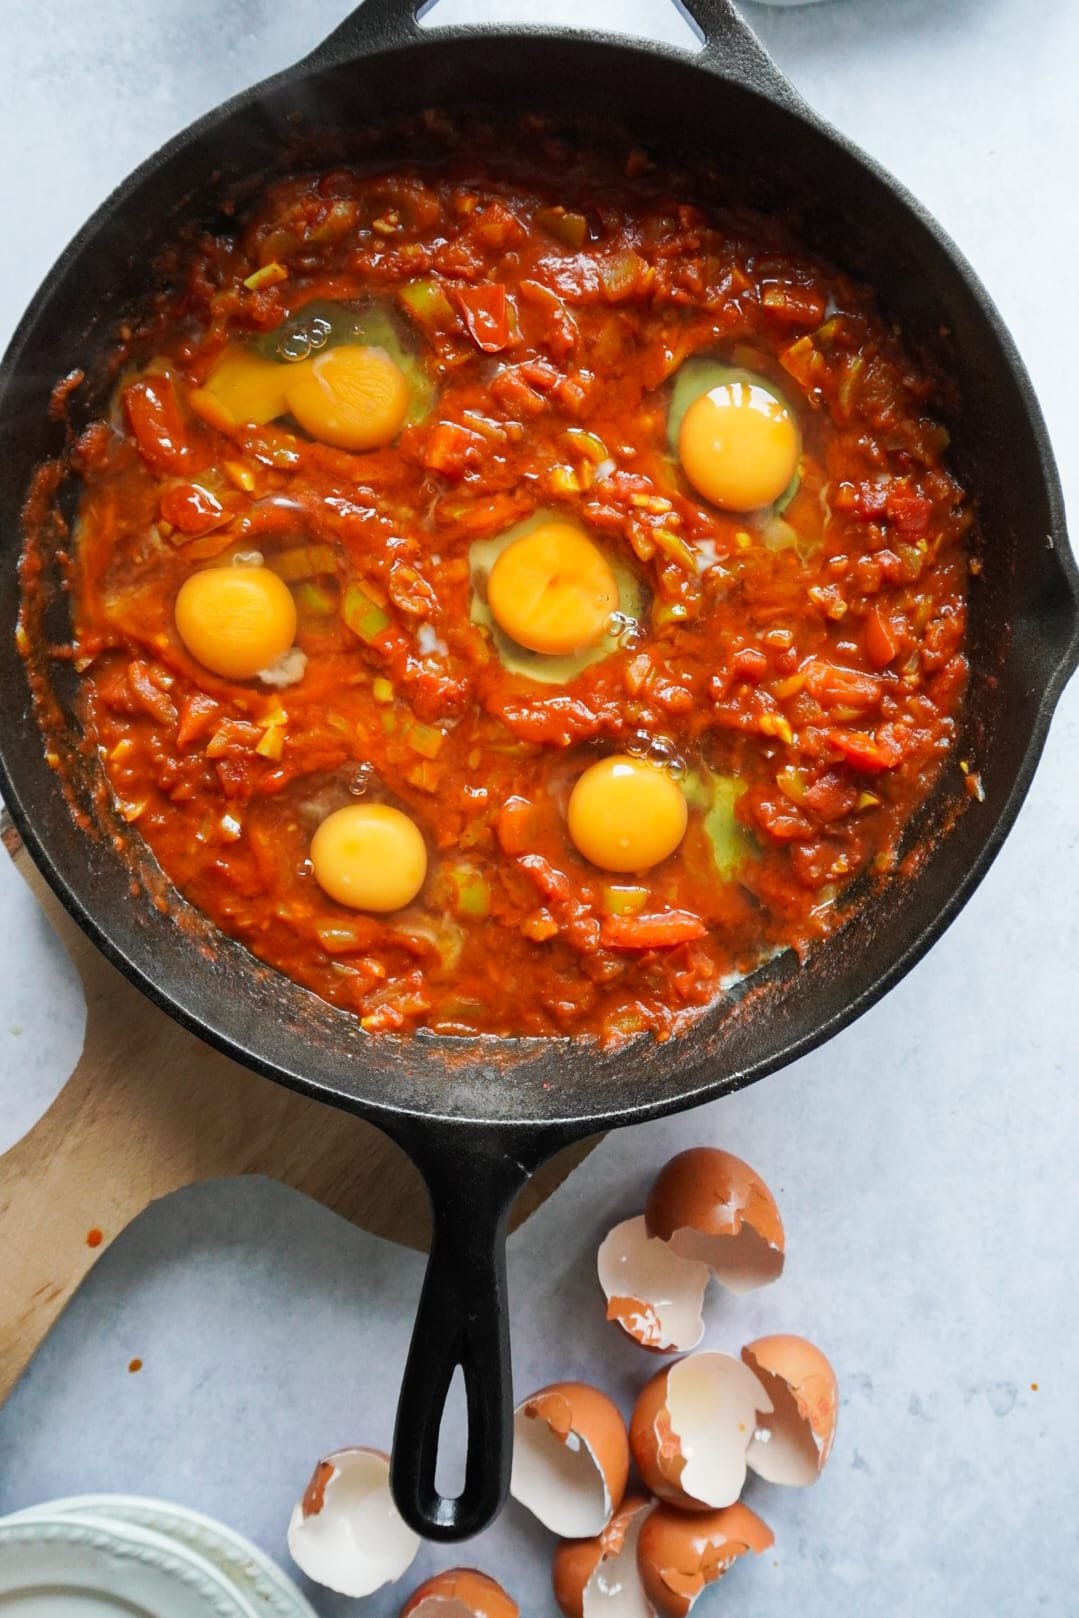 As soon as the tomatoes have become soft and the water has dried up, make little wells in the mixture and crack the eggs one by one into the wells. Put the lid back on so the eggs can cook and harden. Serve up and enjoy!